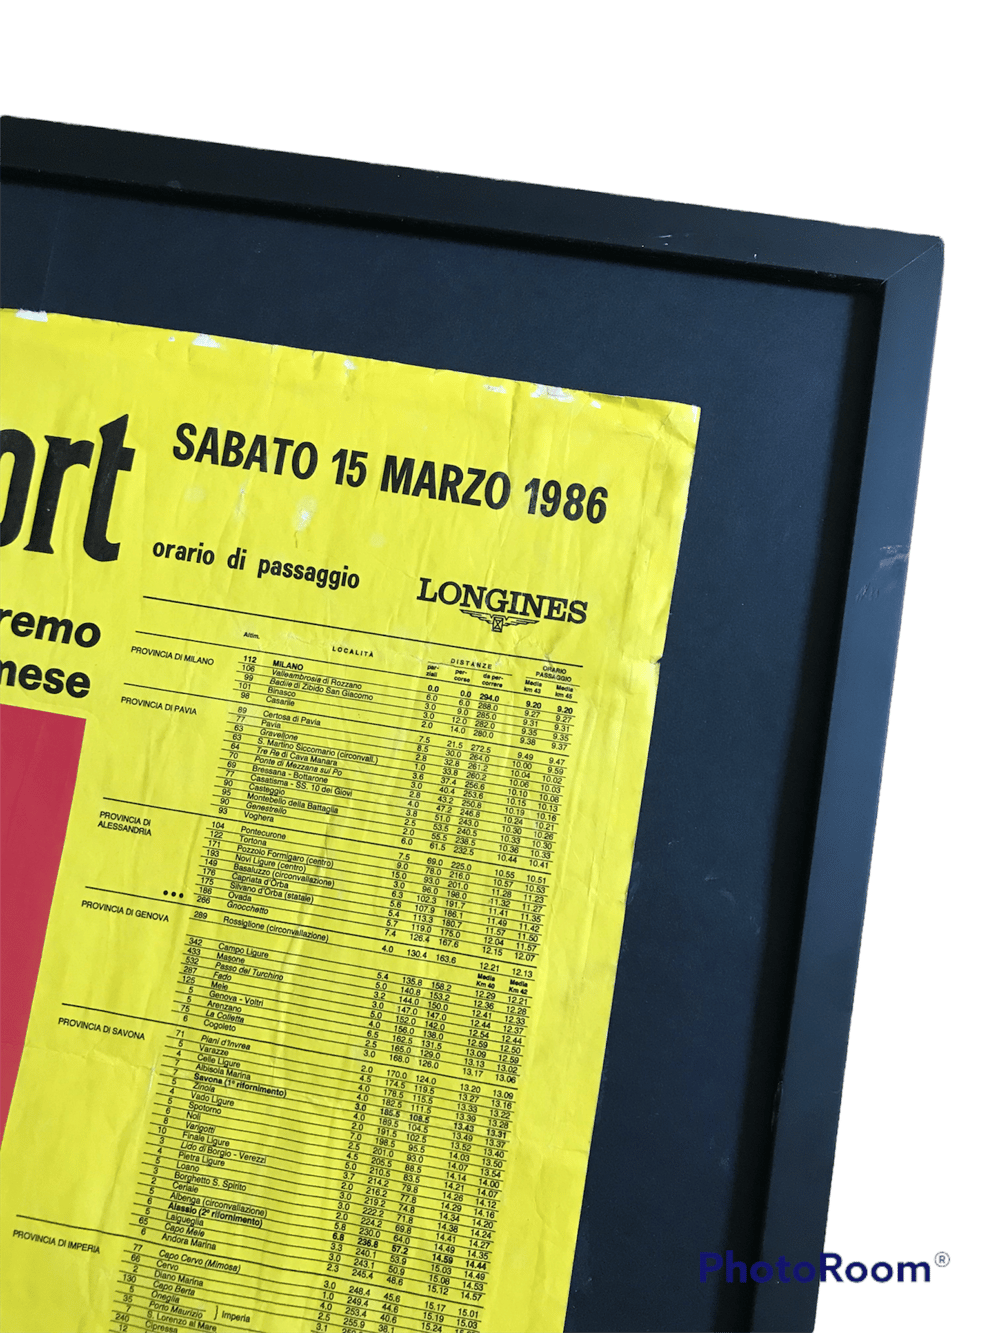 Authentic signposting of Milan-San Remo 1986